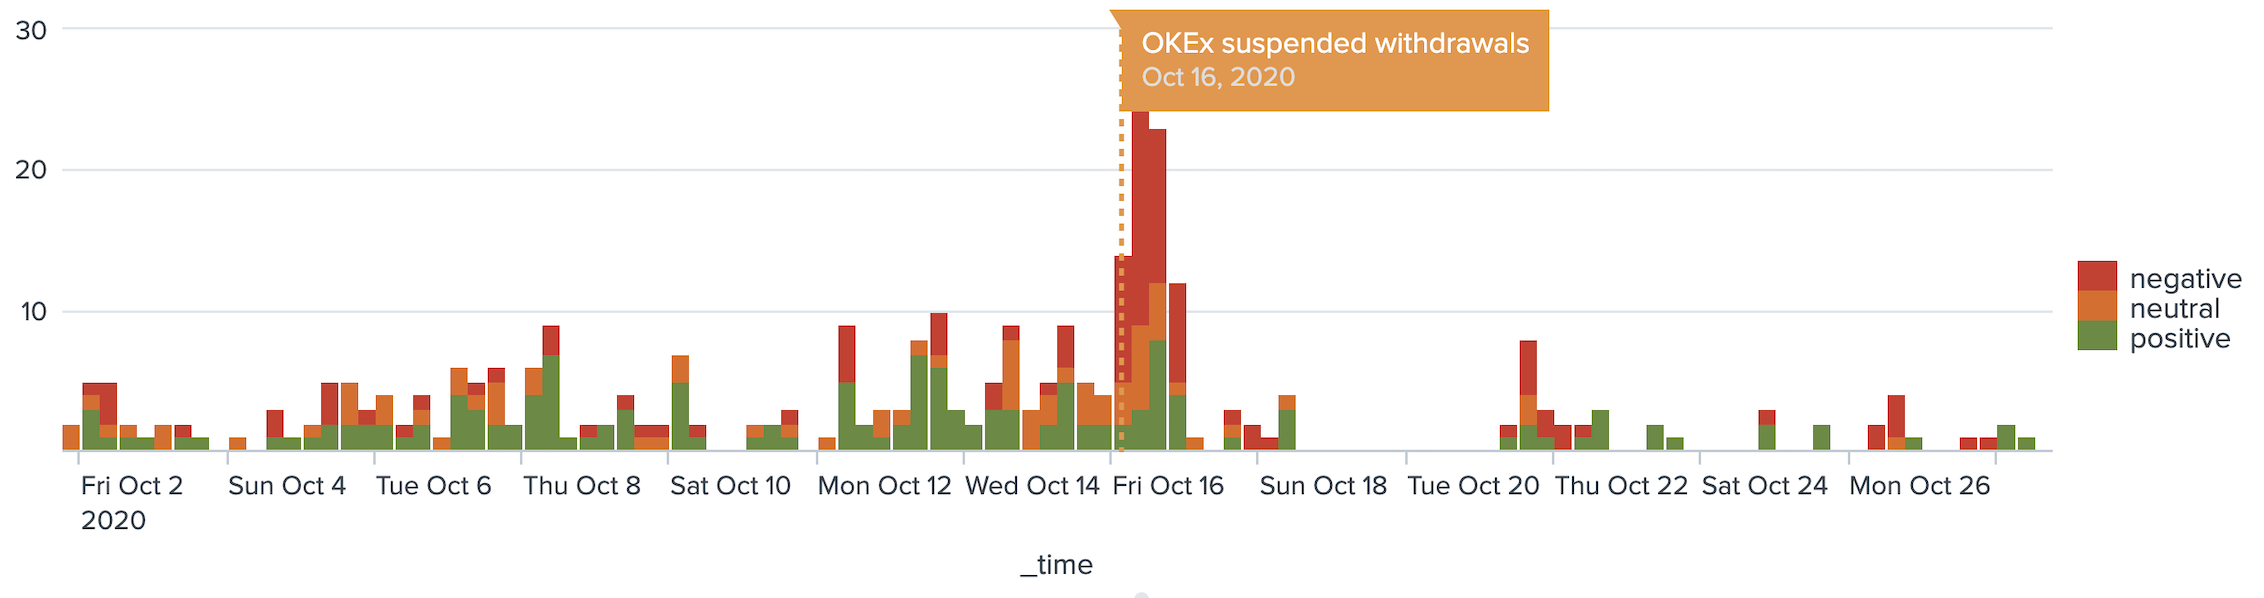 Sentiment Analysis for OKEx. Source: <a href="https://inca.digital/products#data">Inca Digital</a>